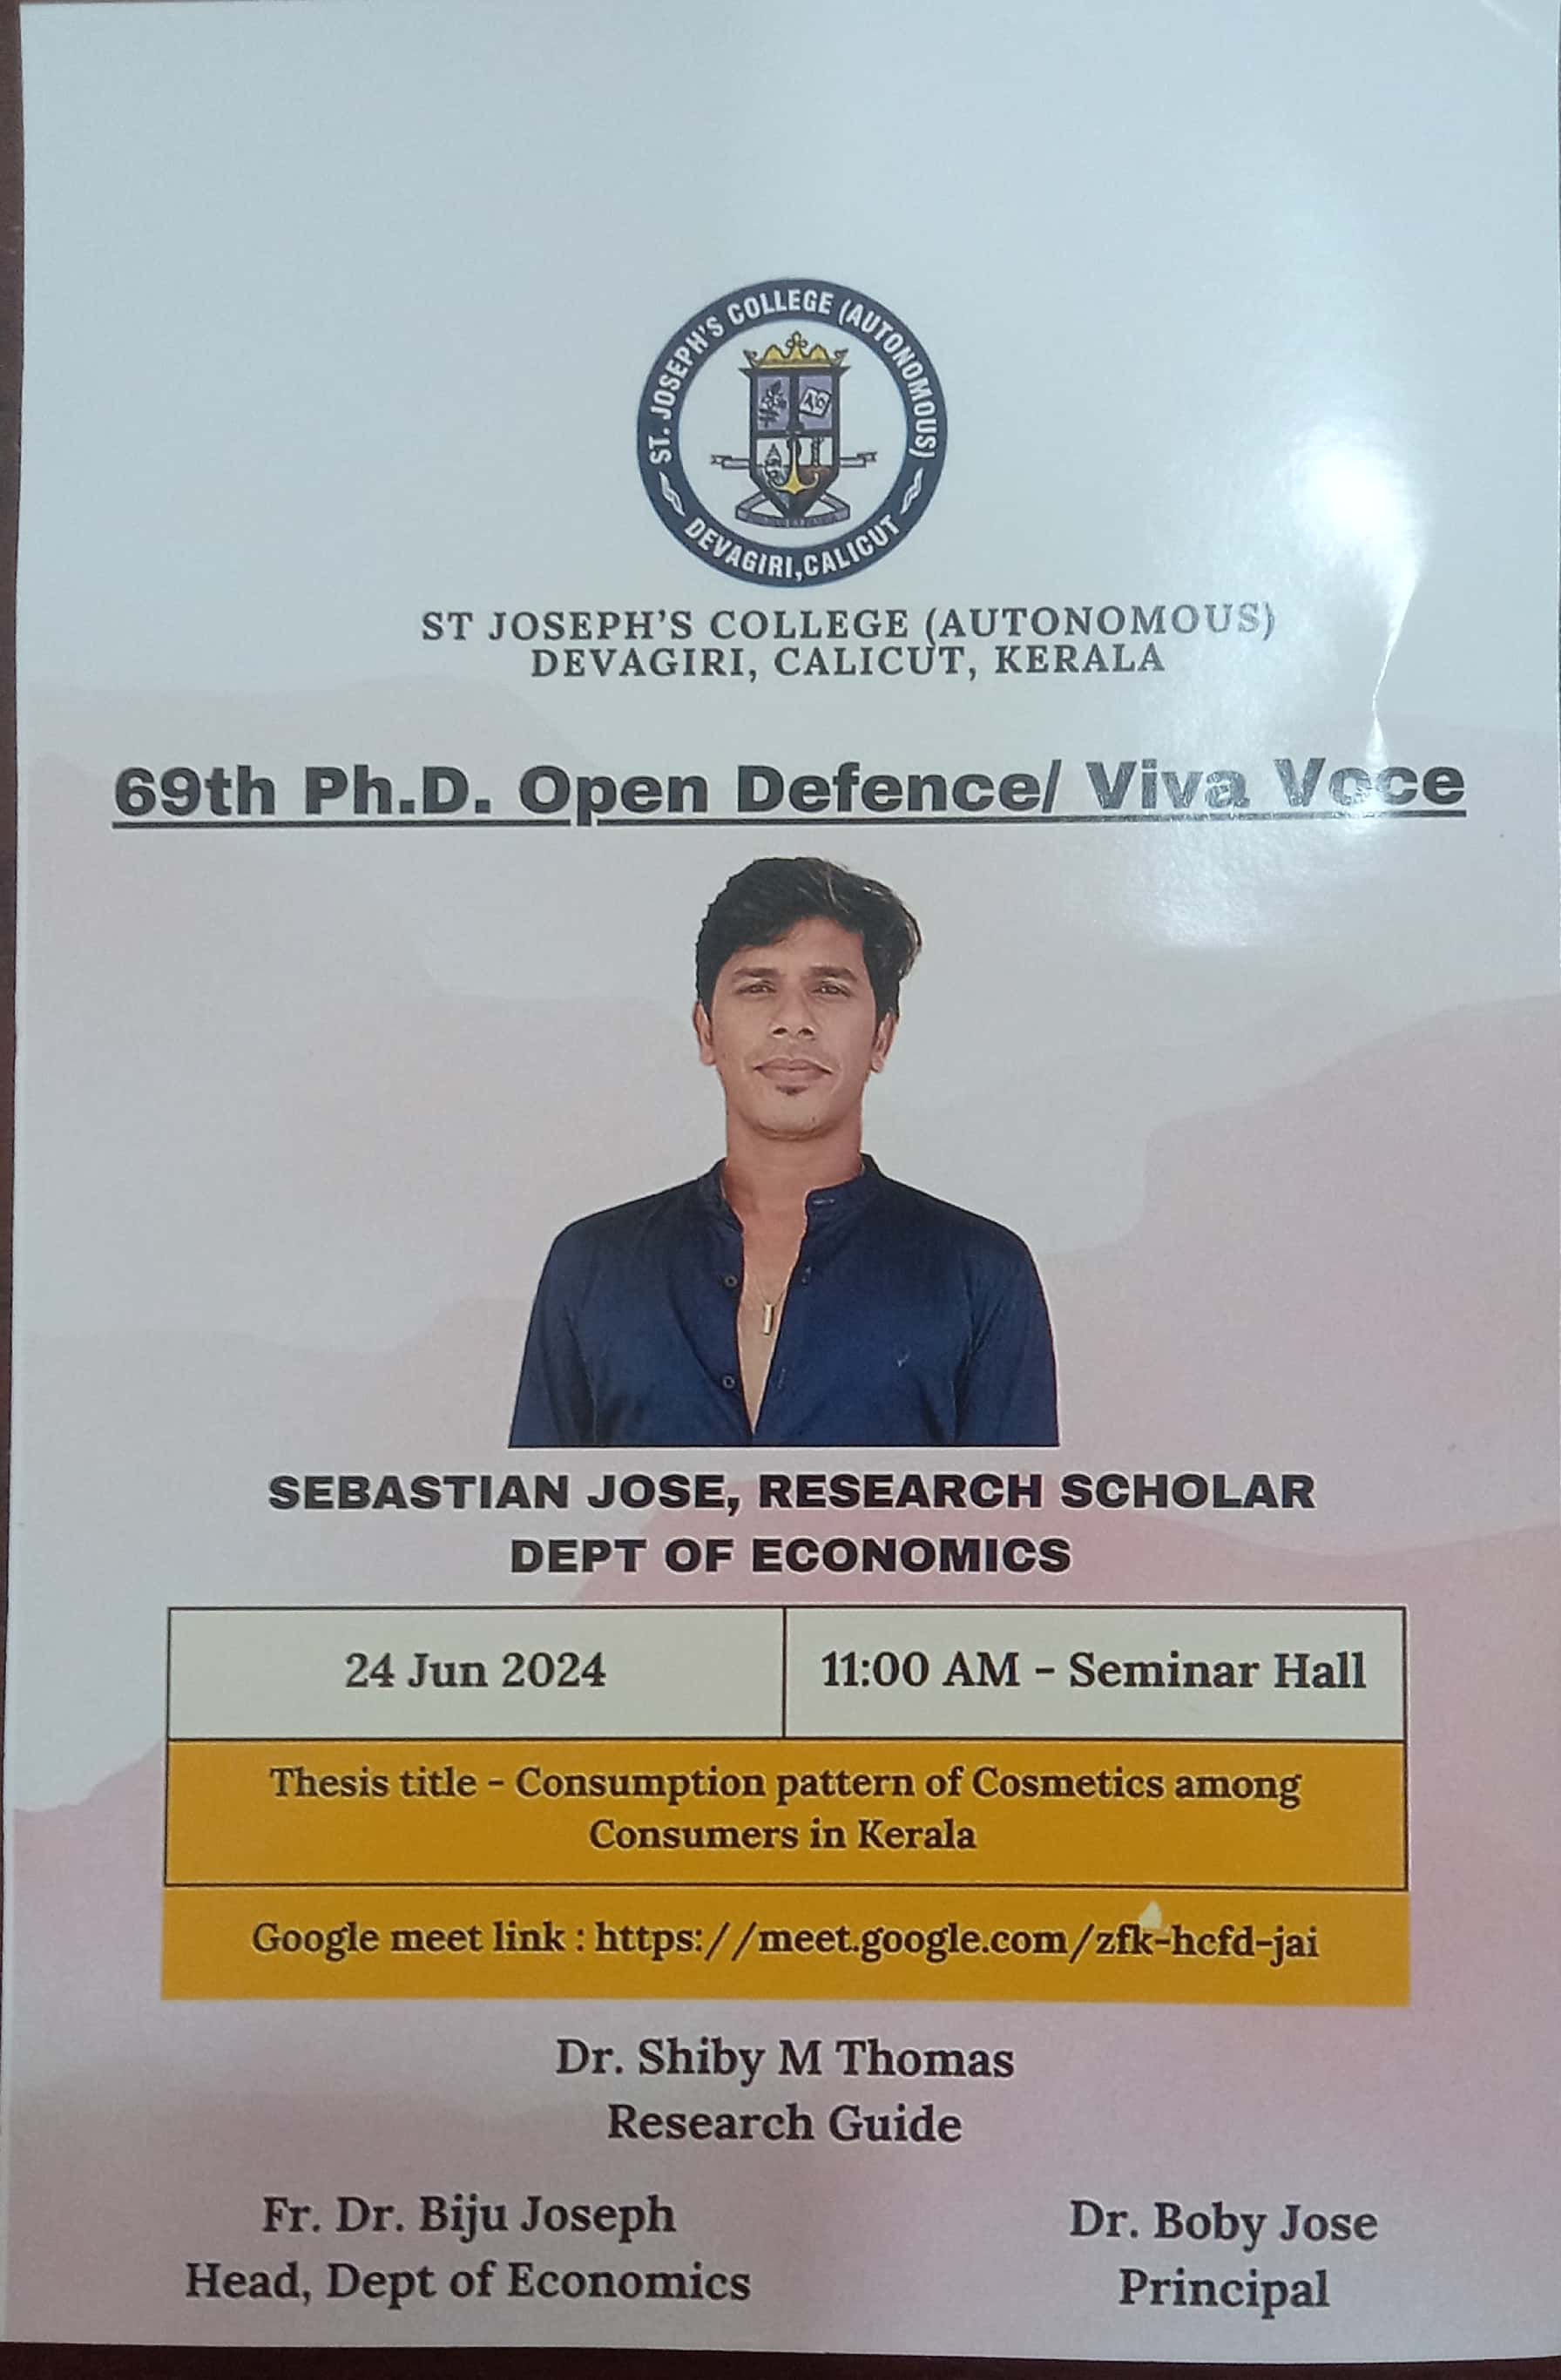 69th Ph.D Open Defence